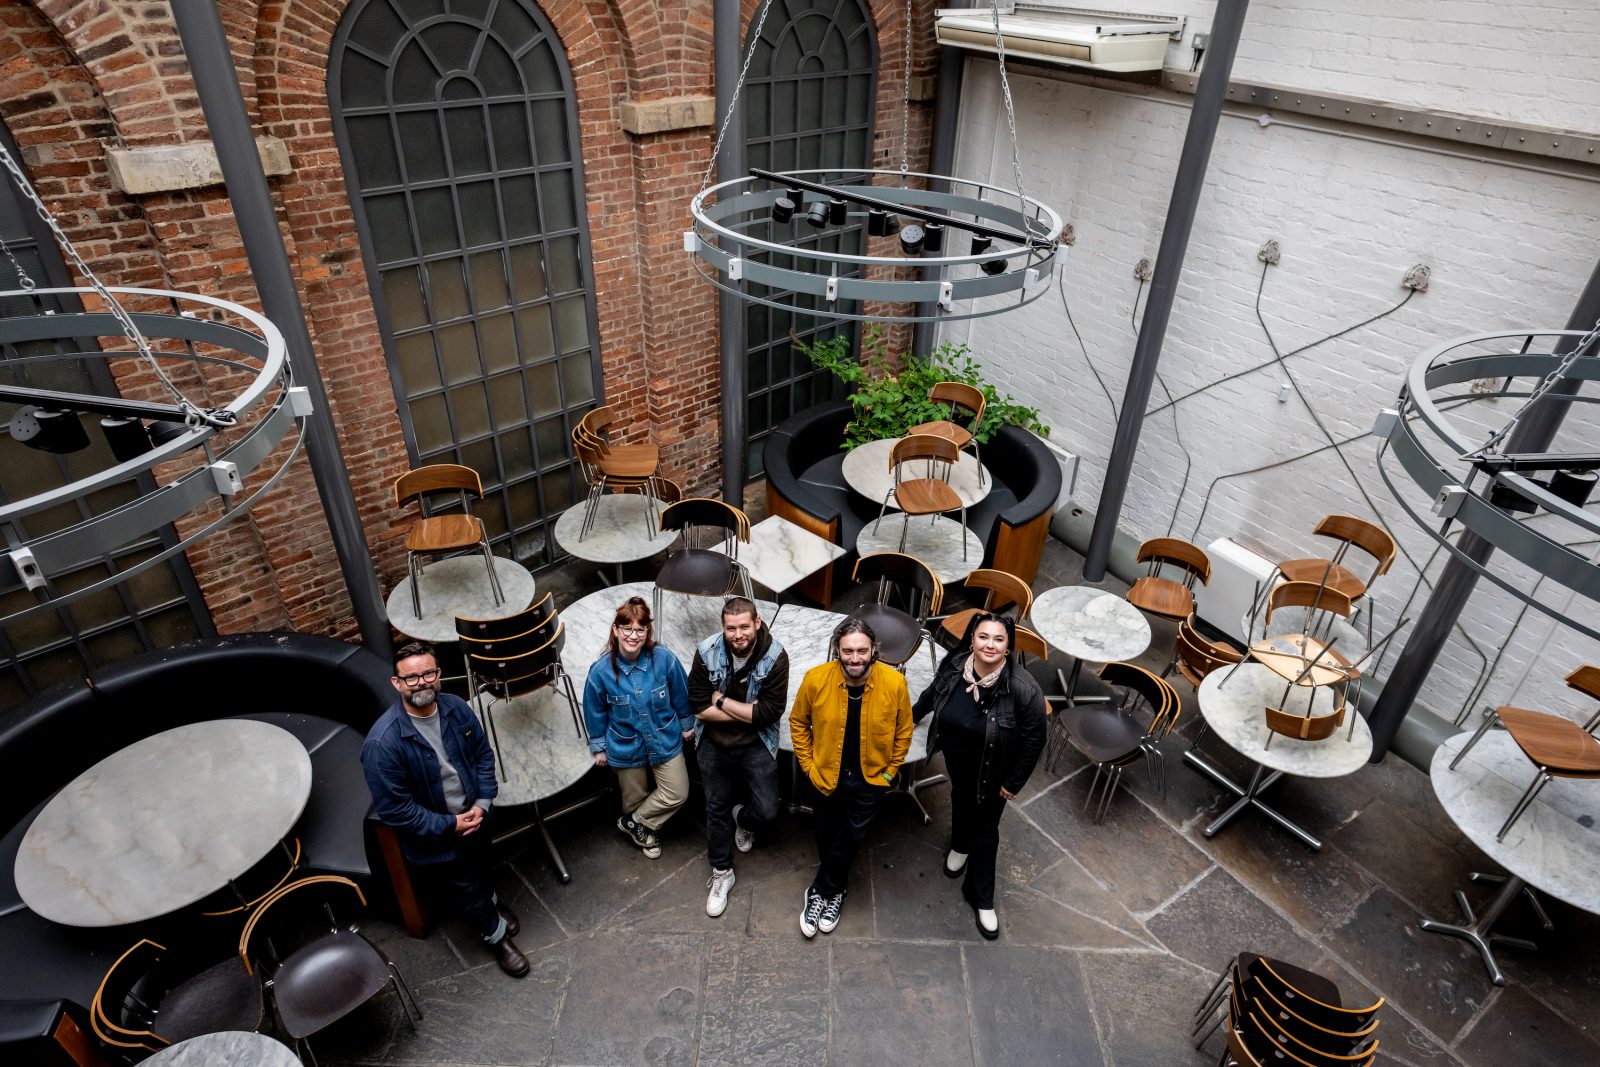 five people stood next to table and chairs inside an old building with exposed brick walls.